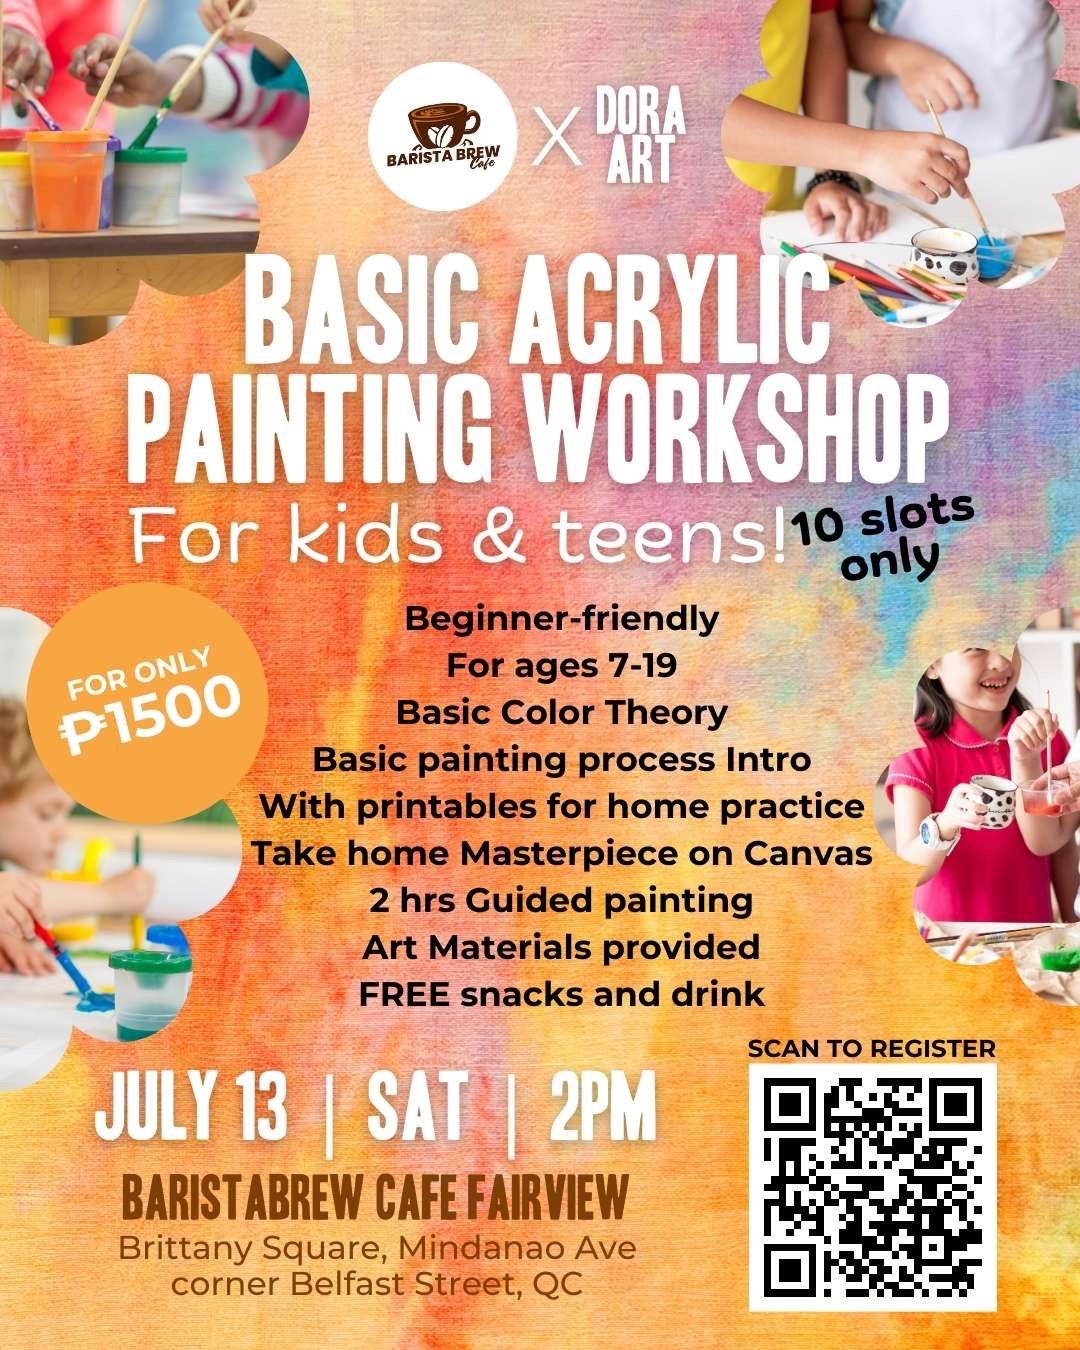 Basic Acrylic Painting Workshop for Kids & Teens